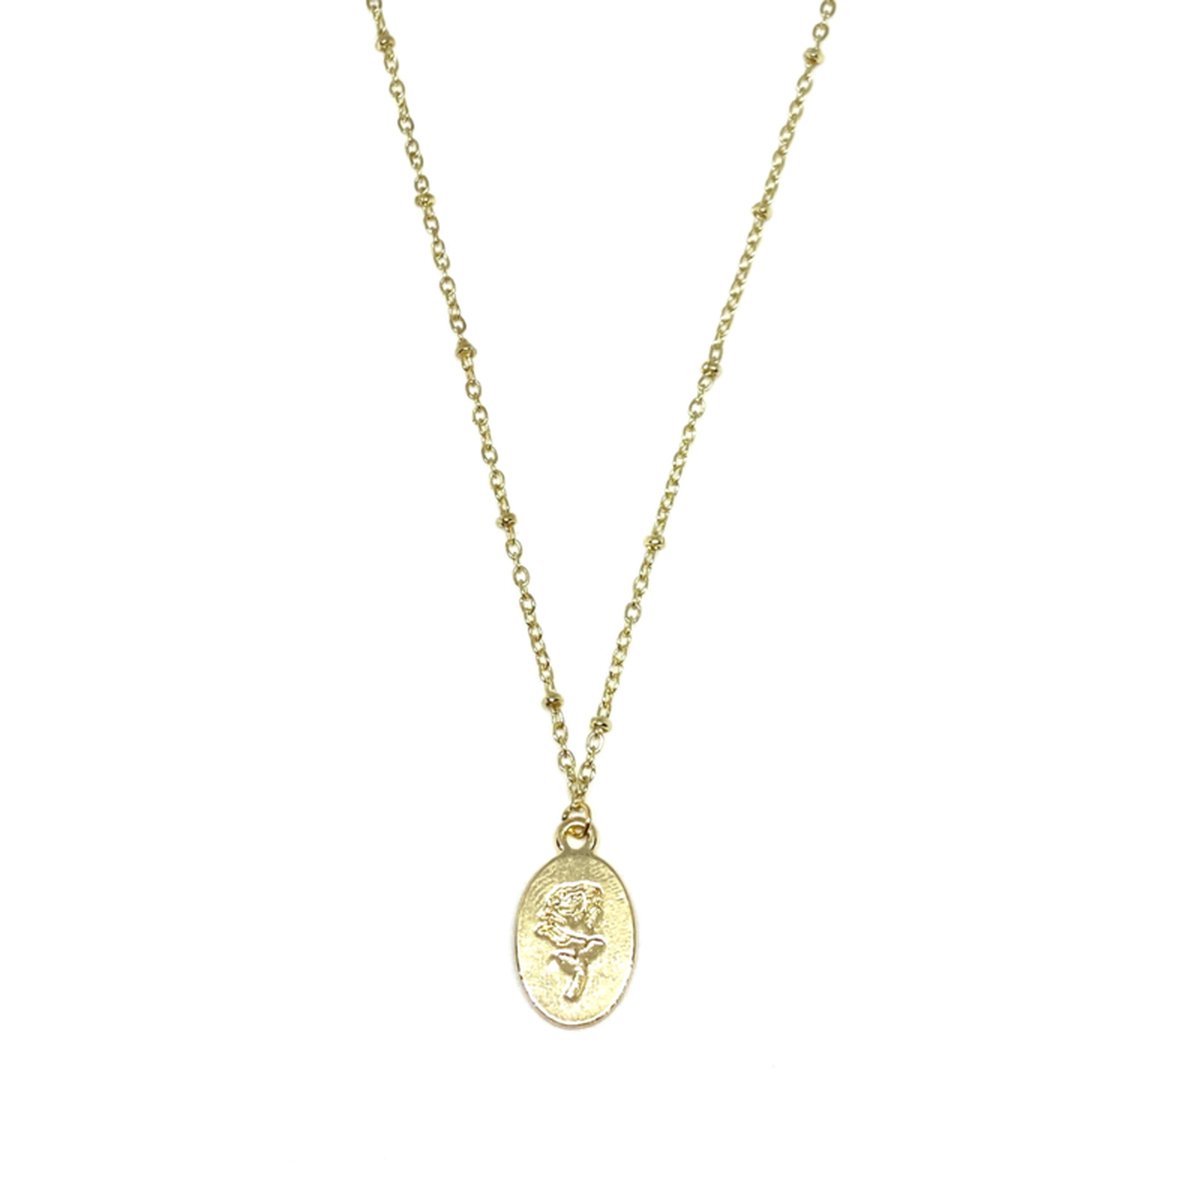 The rose necklace - gold